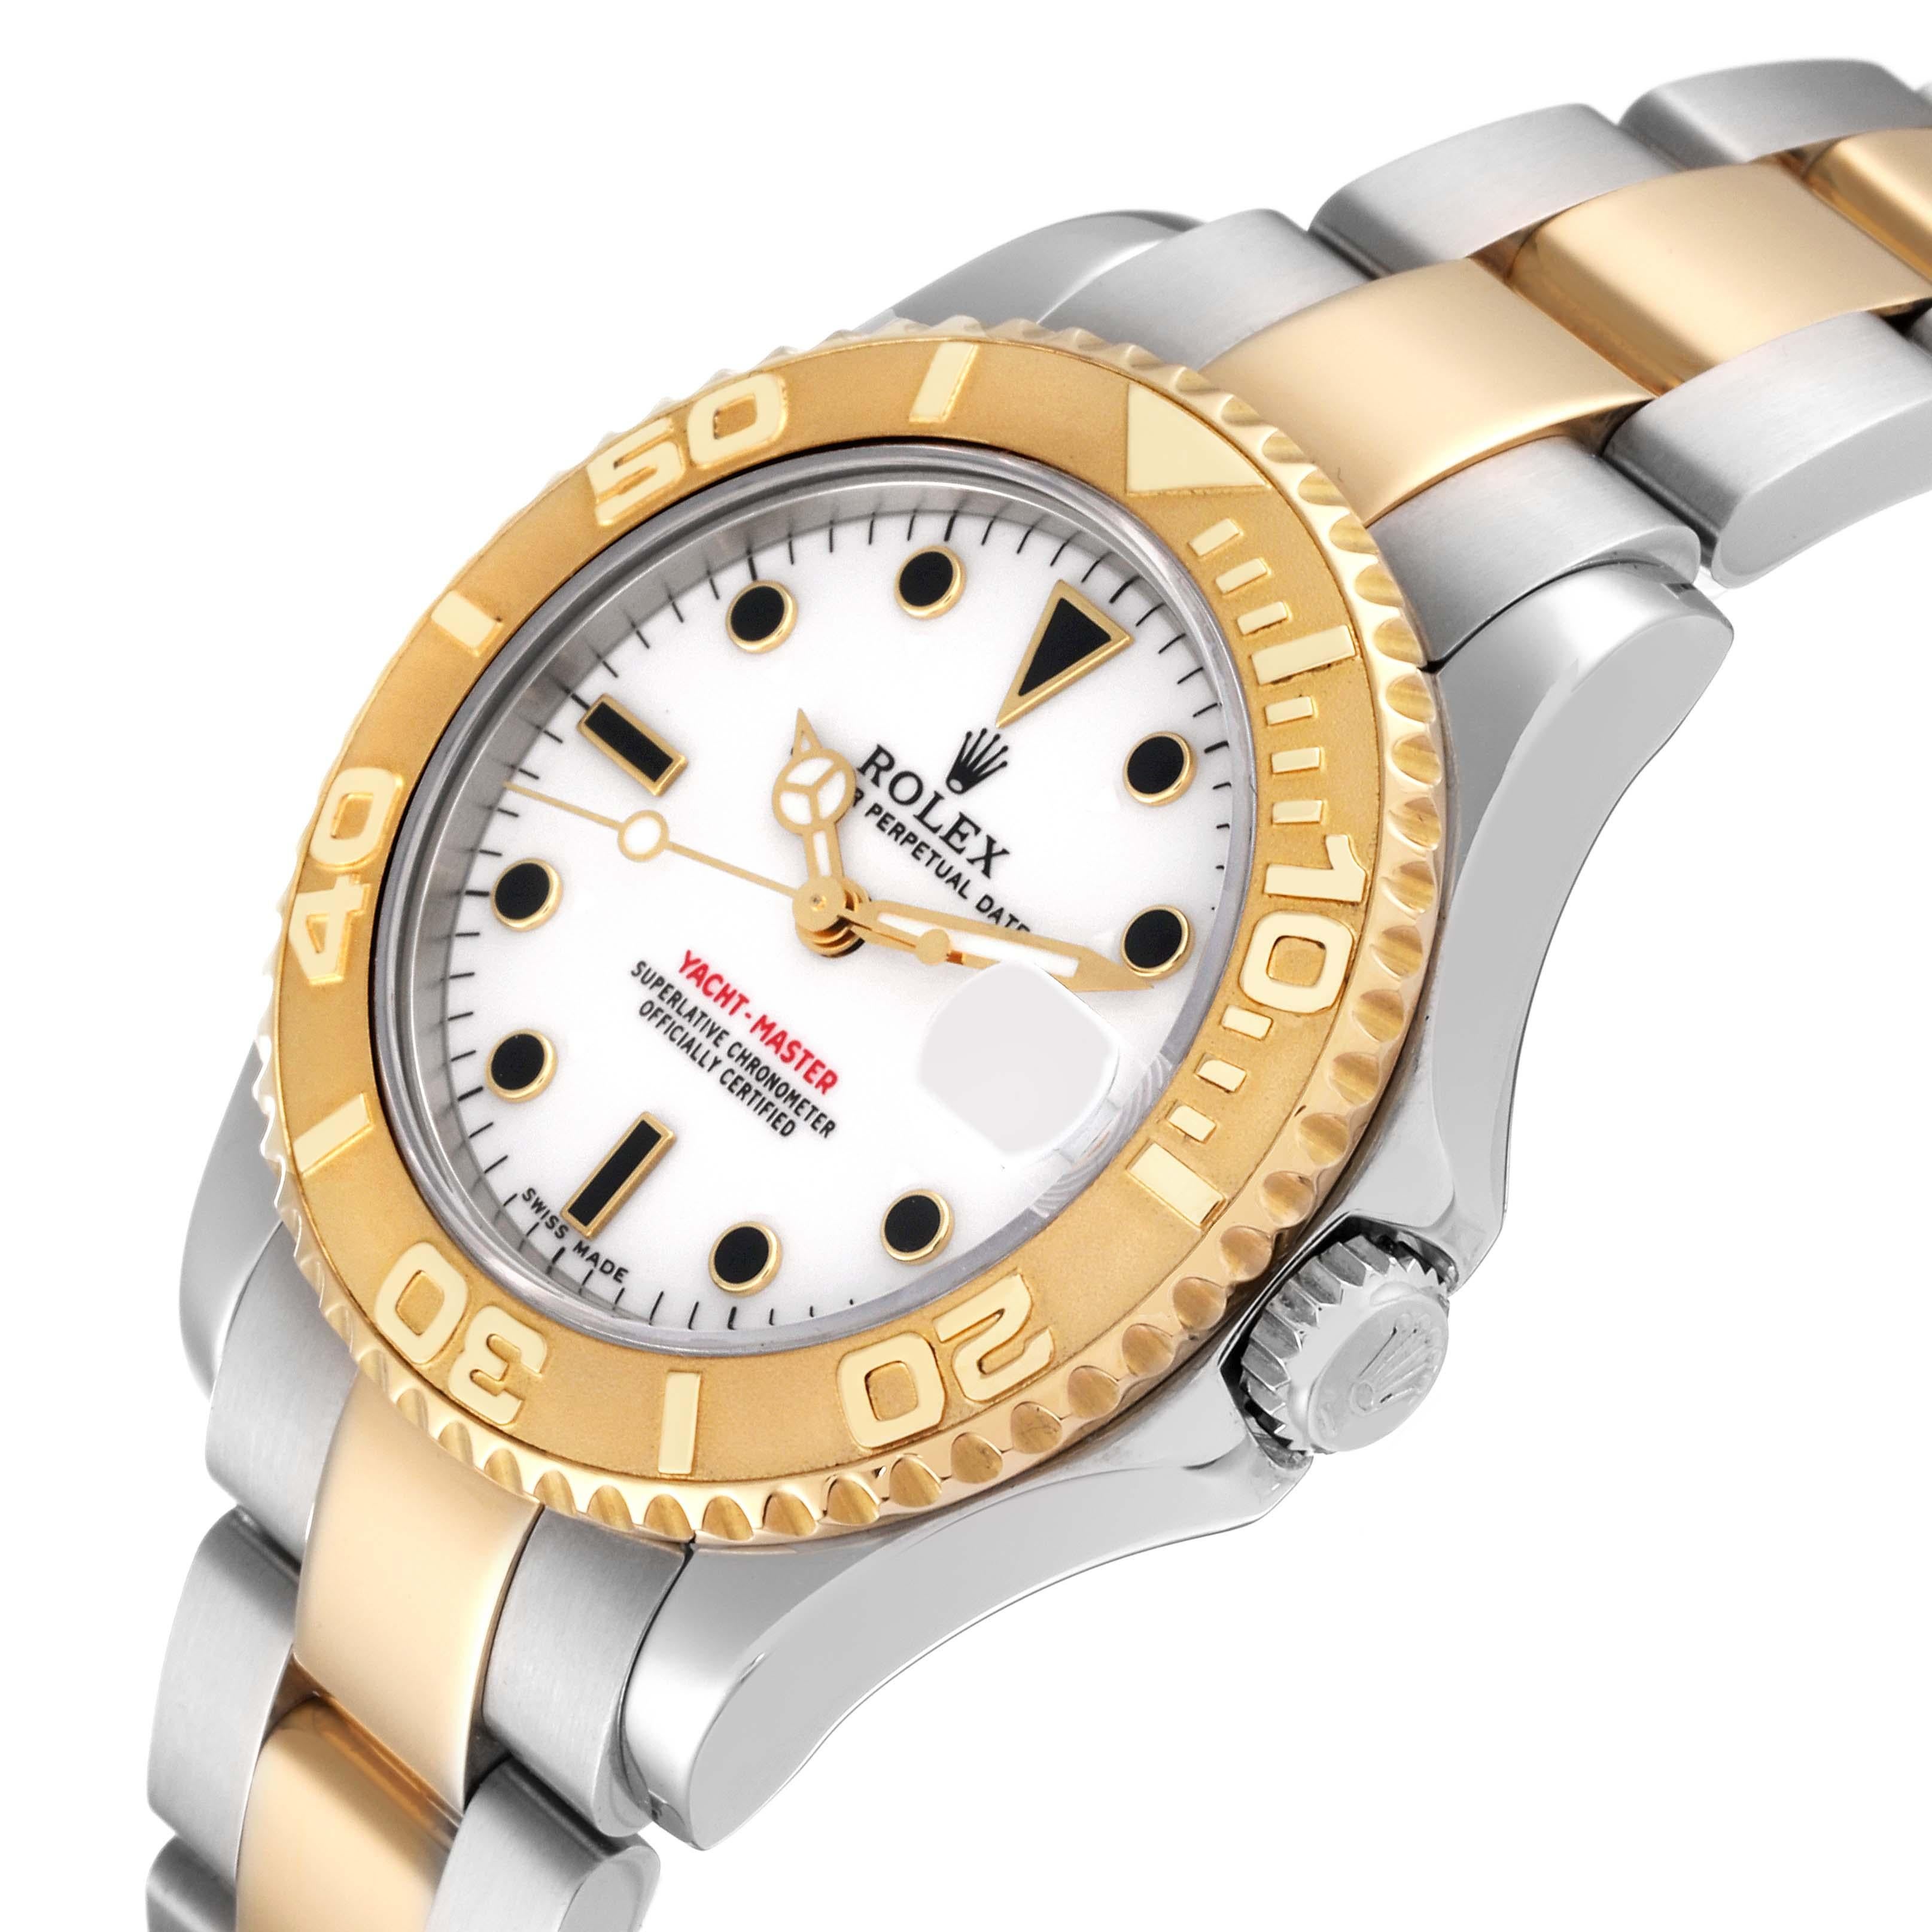 Men's Rolex Yachtmaster Midsize Steel Yellow Gold Mens Watch 168623 Box Papers